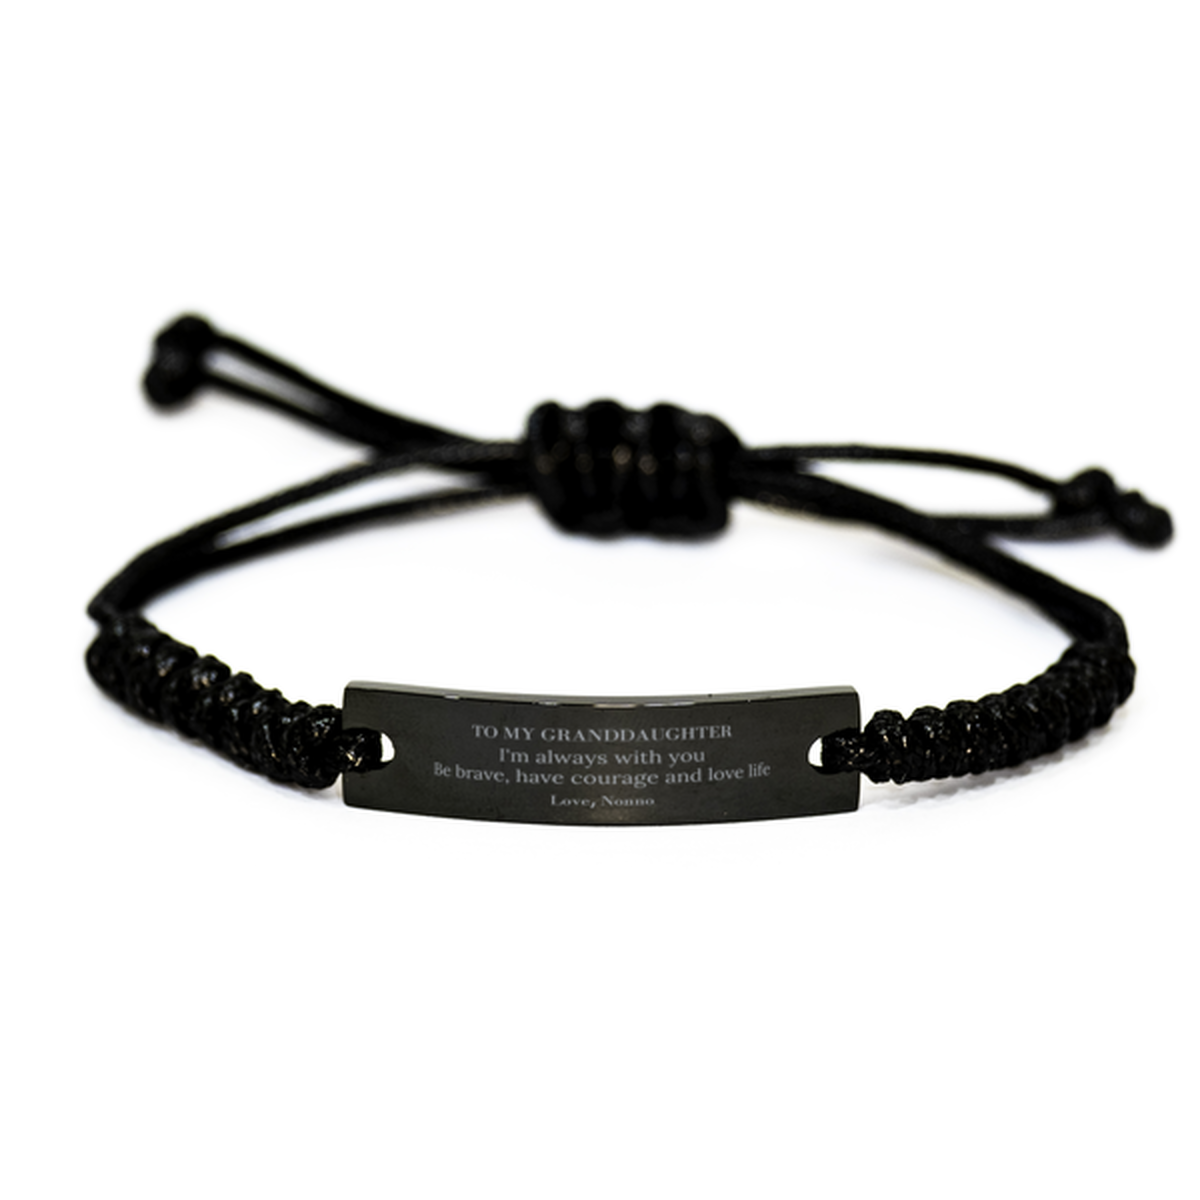 To My Granddaughter Gifts from Nonno, Unique Black Rope Bracelet Inspirational Christmas Birthday Graduation Gifts for Granddaughter I'm always with you. Be brave, have courage and love life. Love, Nonno